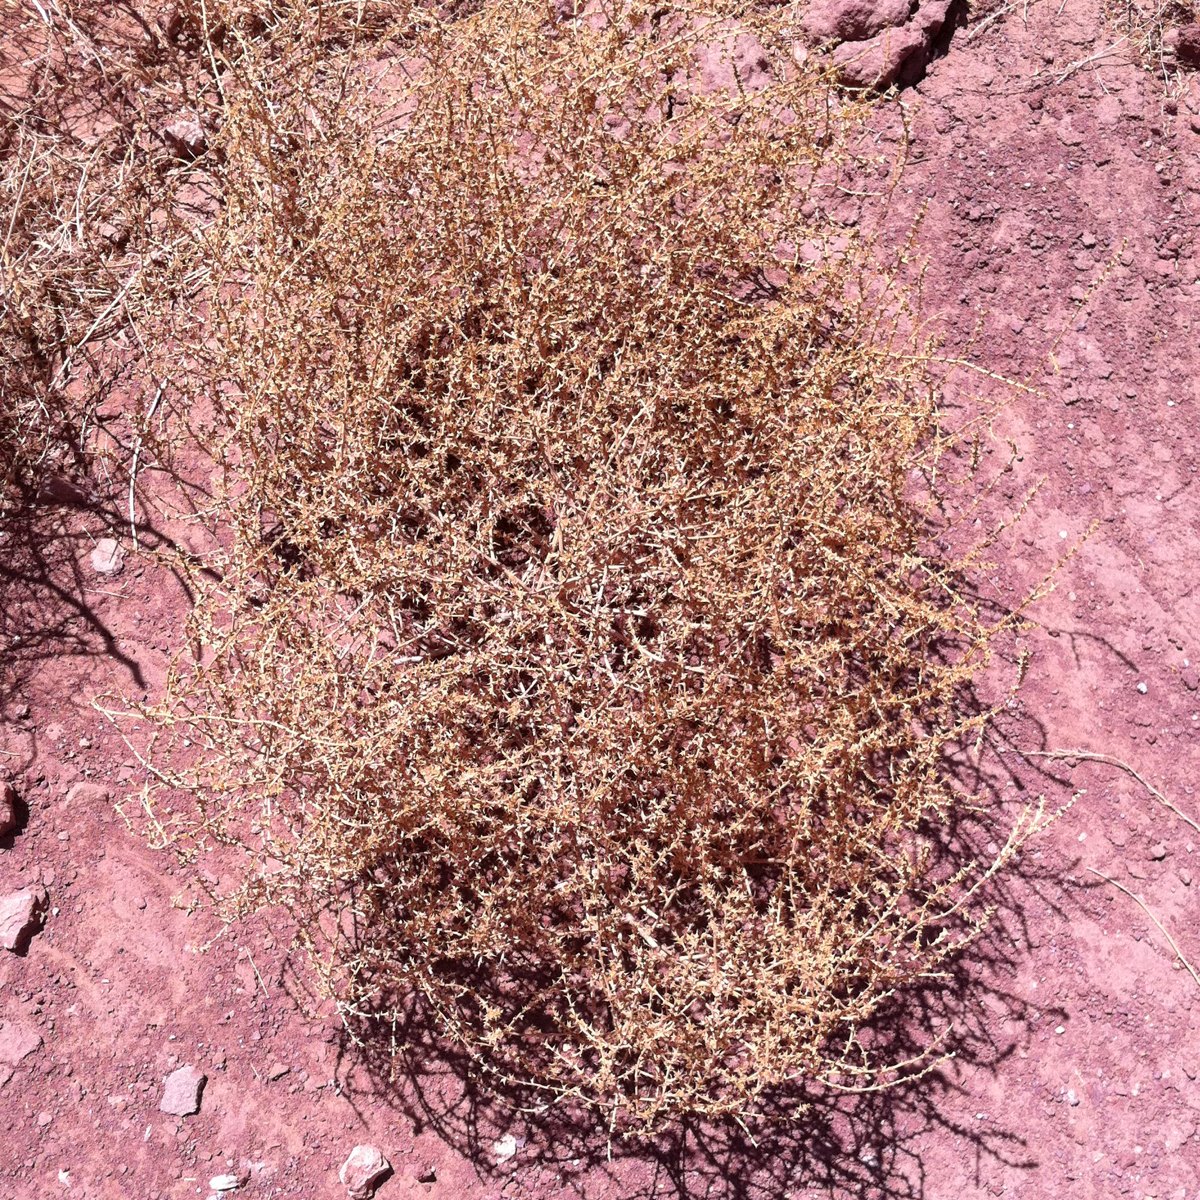 Russian Thistle (tumble weed)